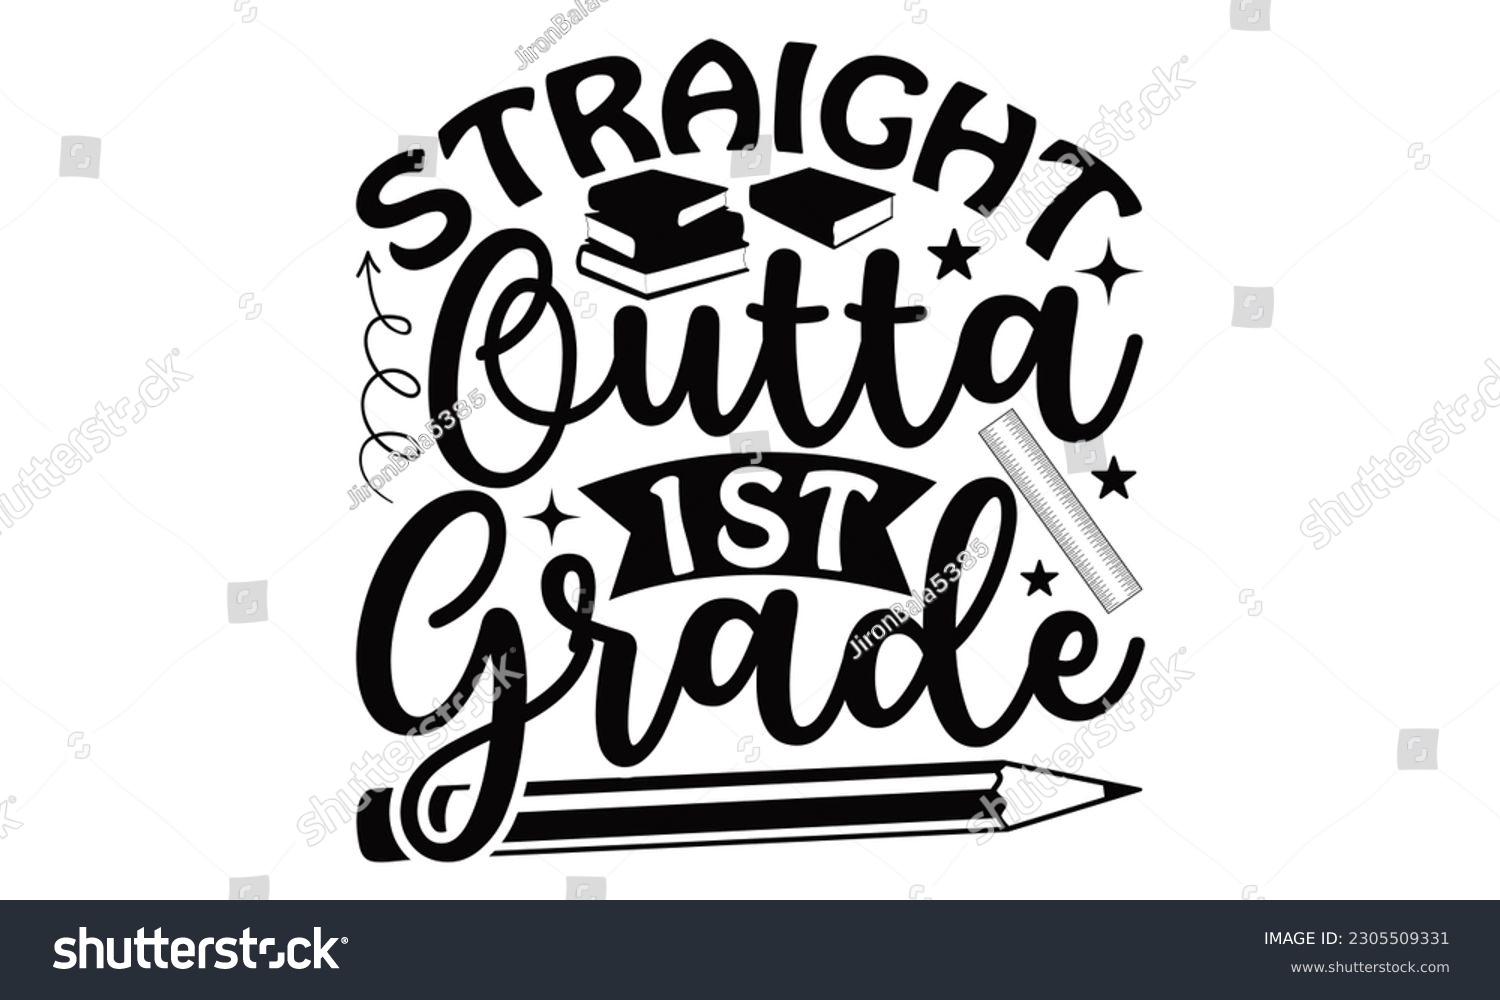 SVG of Straight Outta 1st Grade - School SVG Design, typography design, this illustration can be used as a print on t-shirts and bags, stationary or as a poster. svg